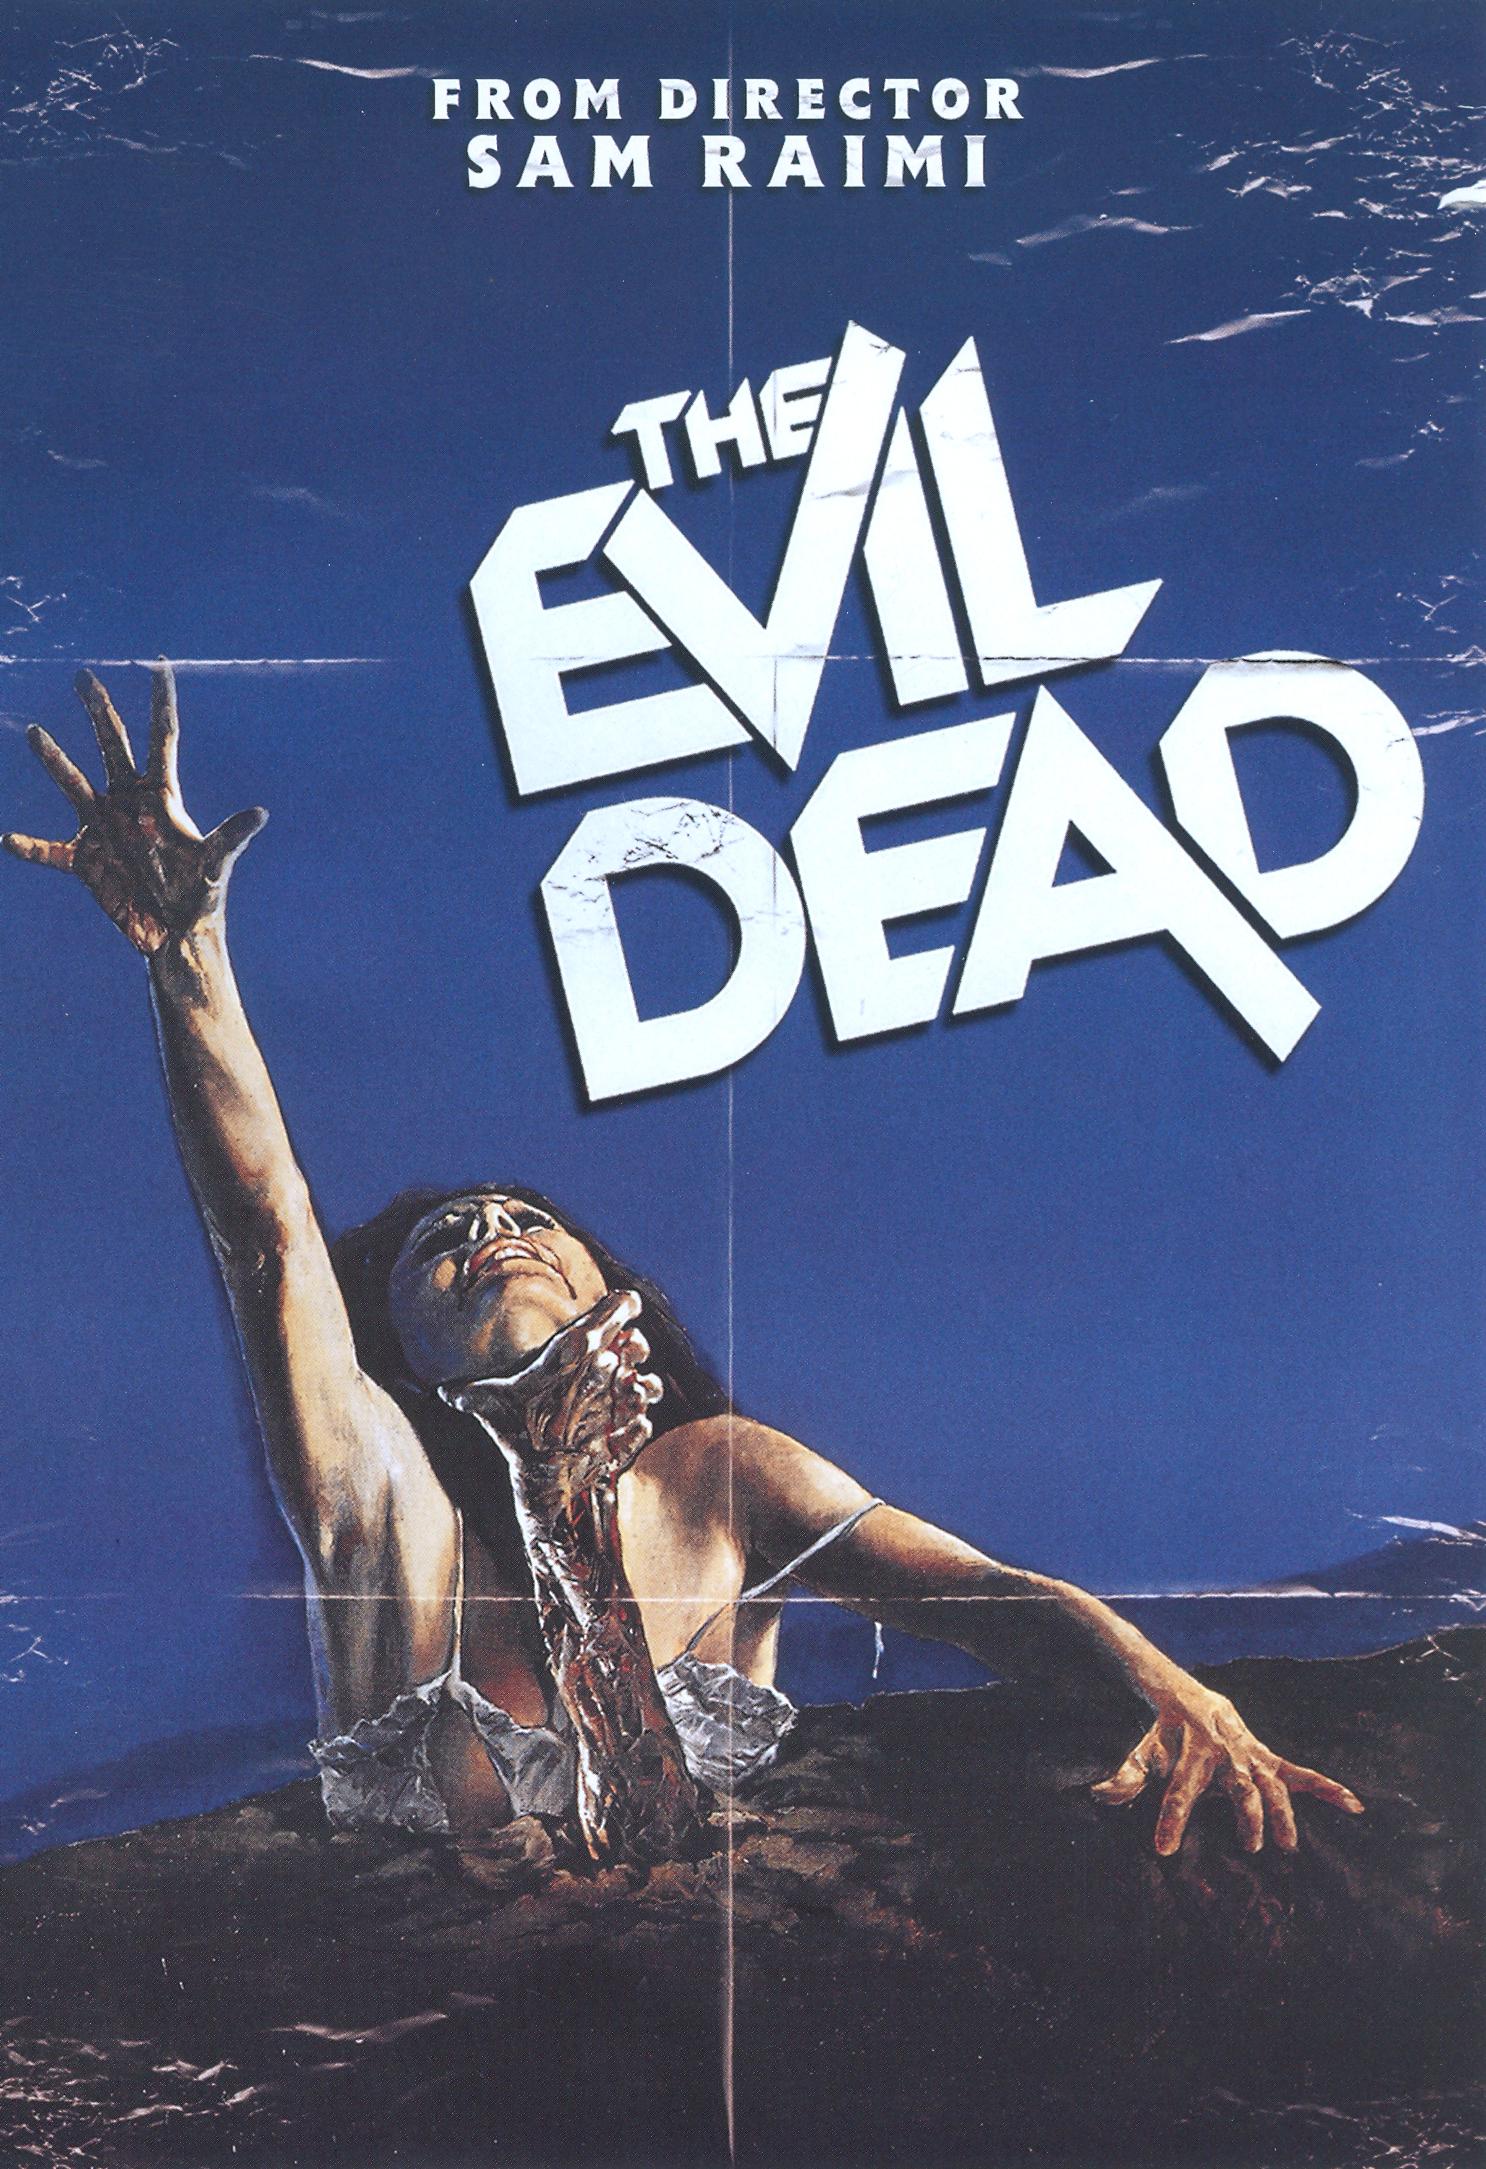 The Evil Dead. 1981. Written and directed by Sam Raimi